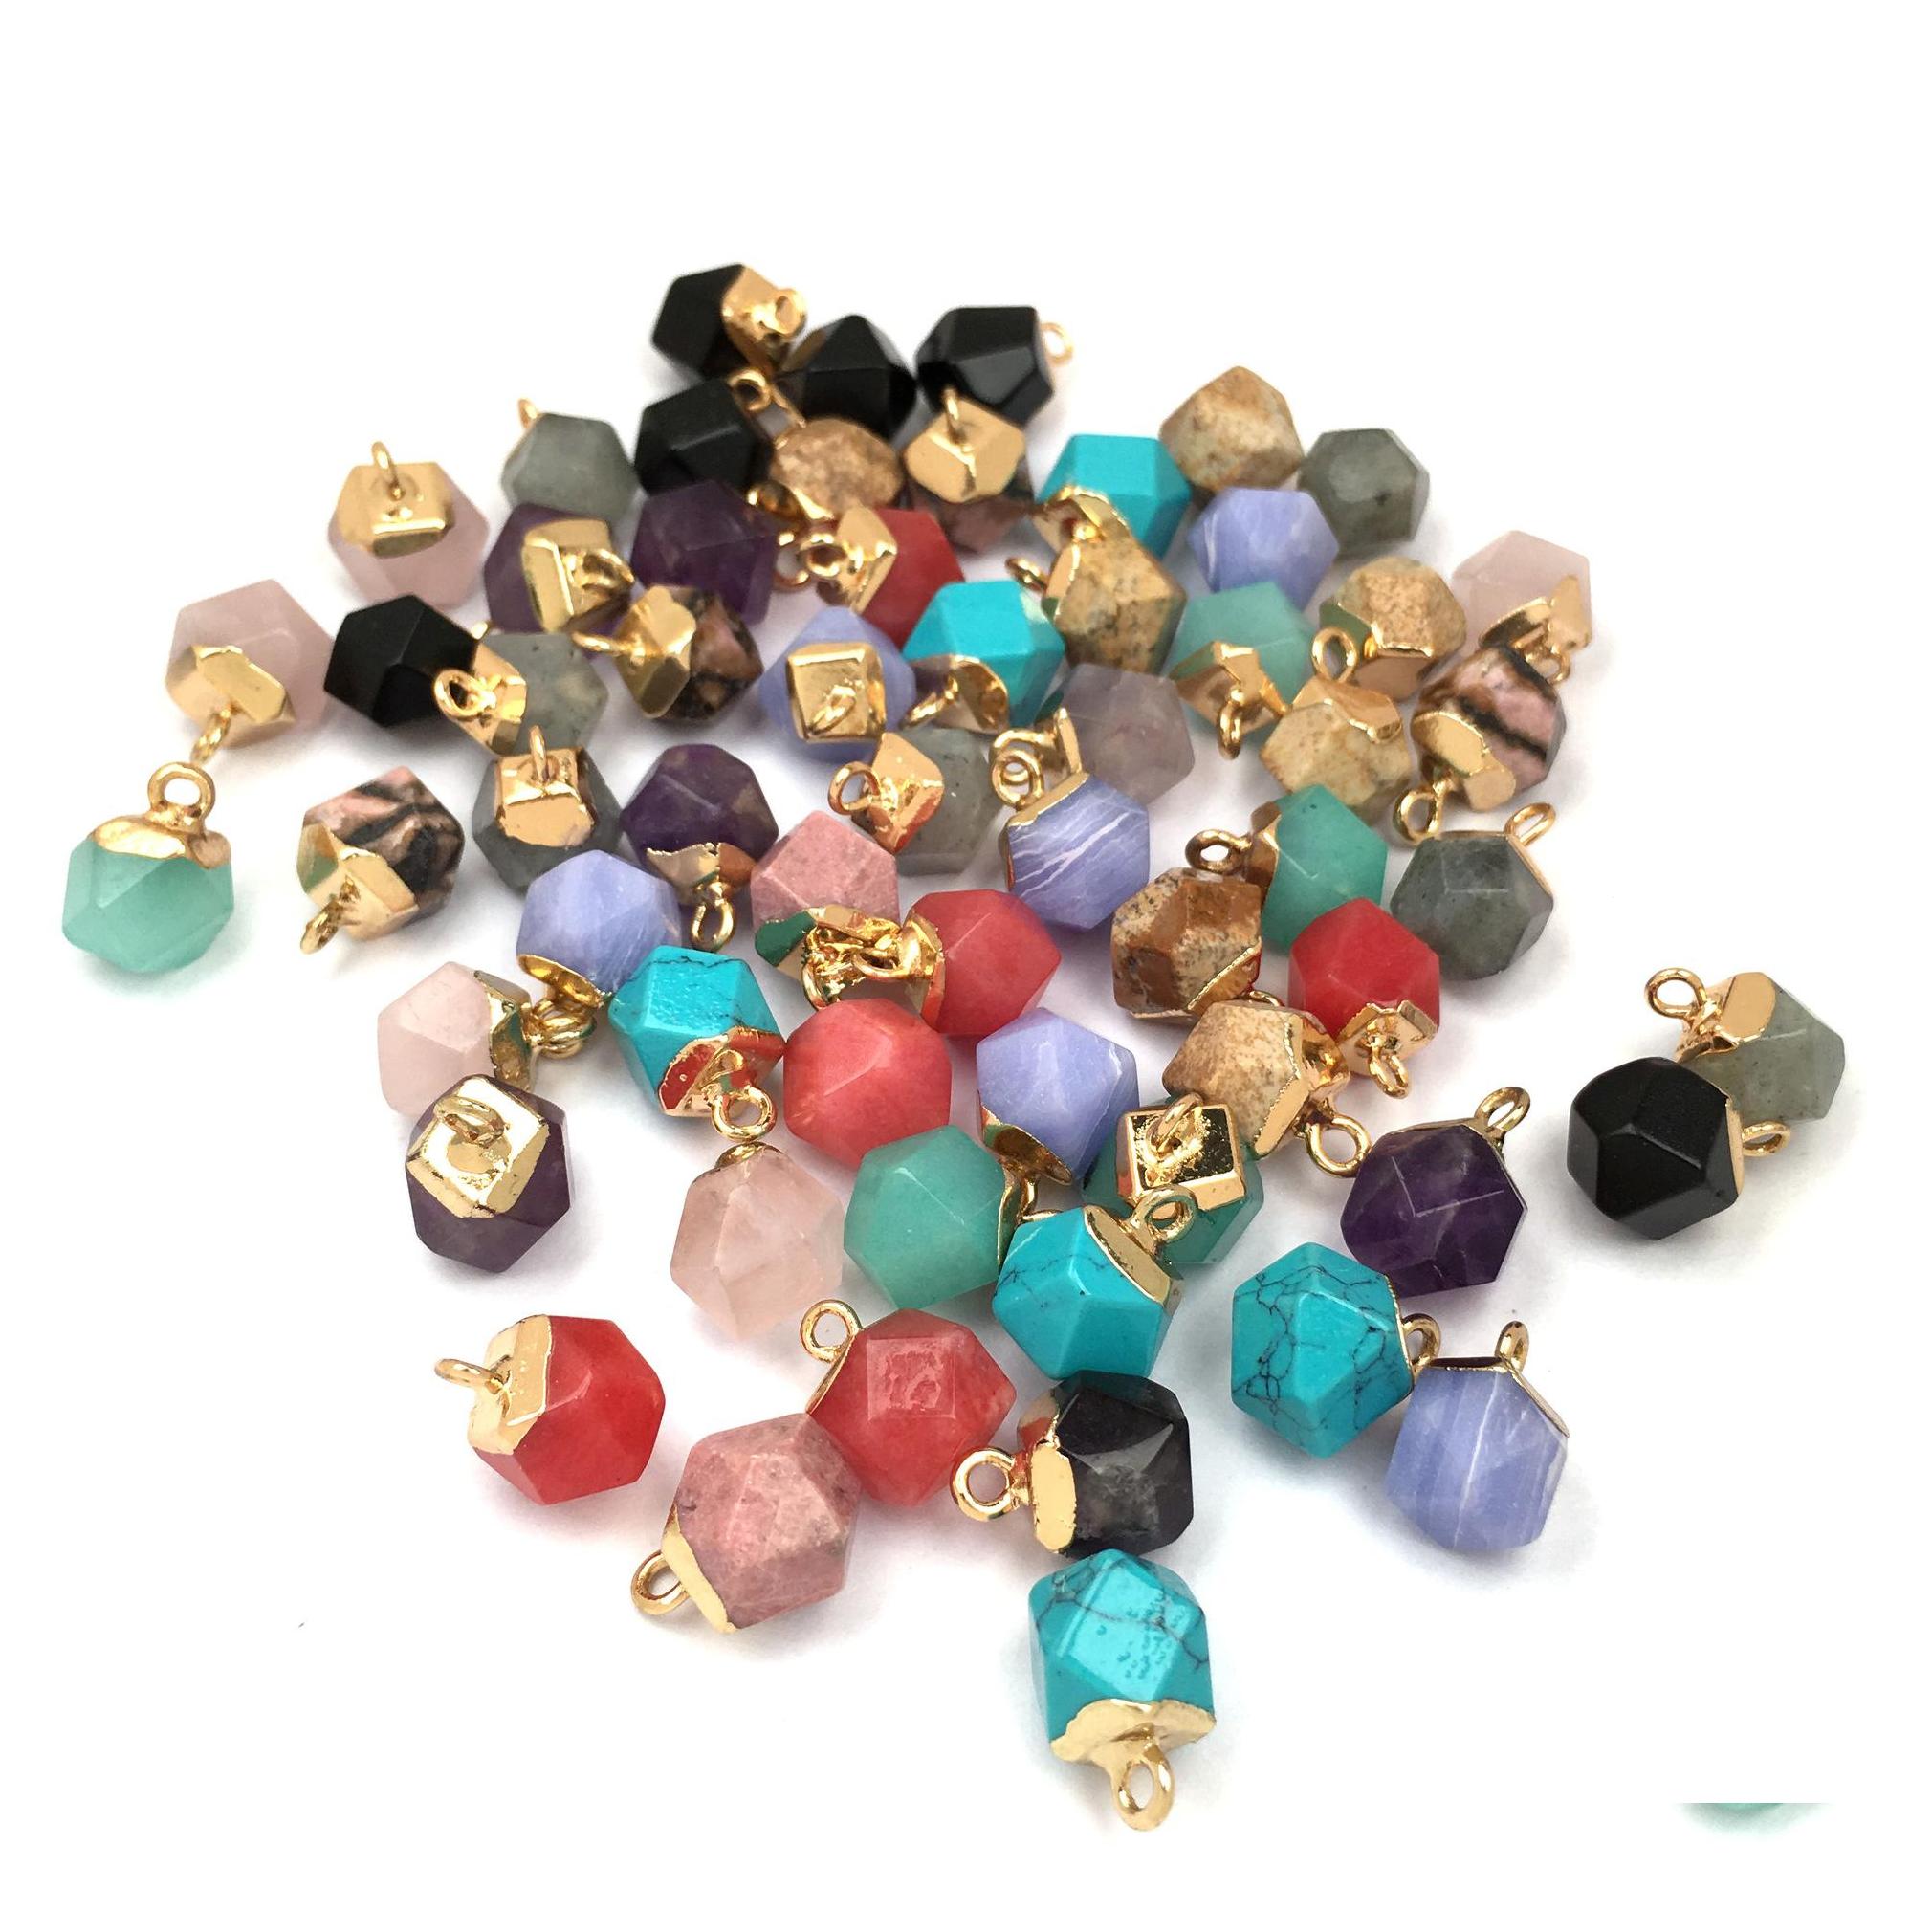 

Charms Faceted Polygon Round Shape Natural Stone Healing Agates Crystal Turquoises Jades Opal Stones Pendant For Jewelry Making Spor Dhmc5